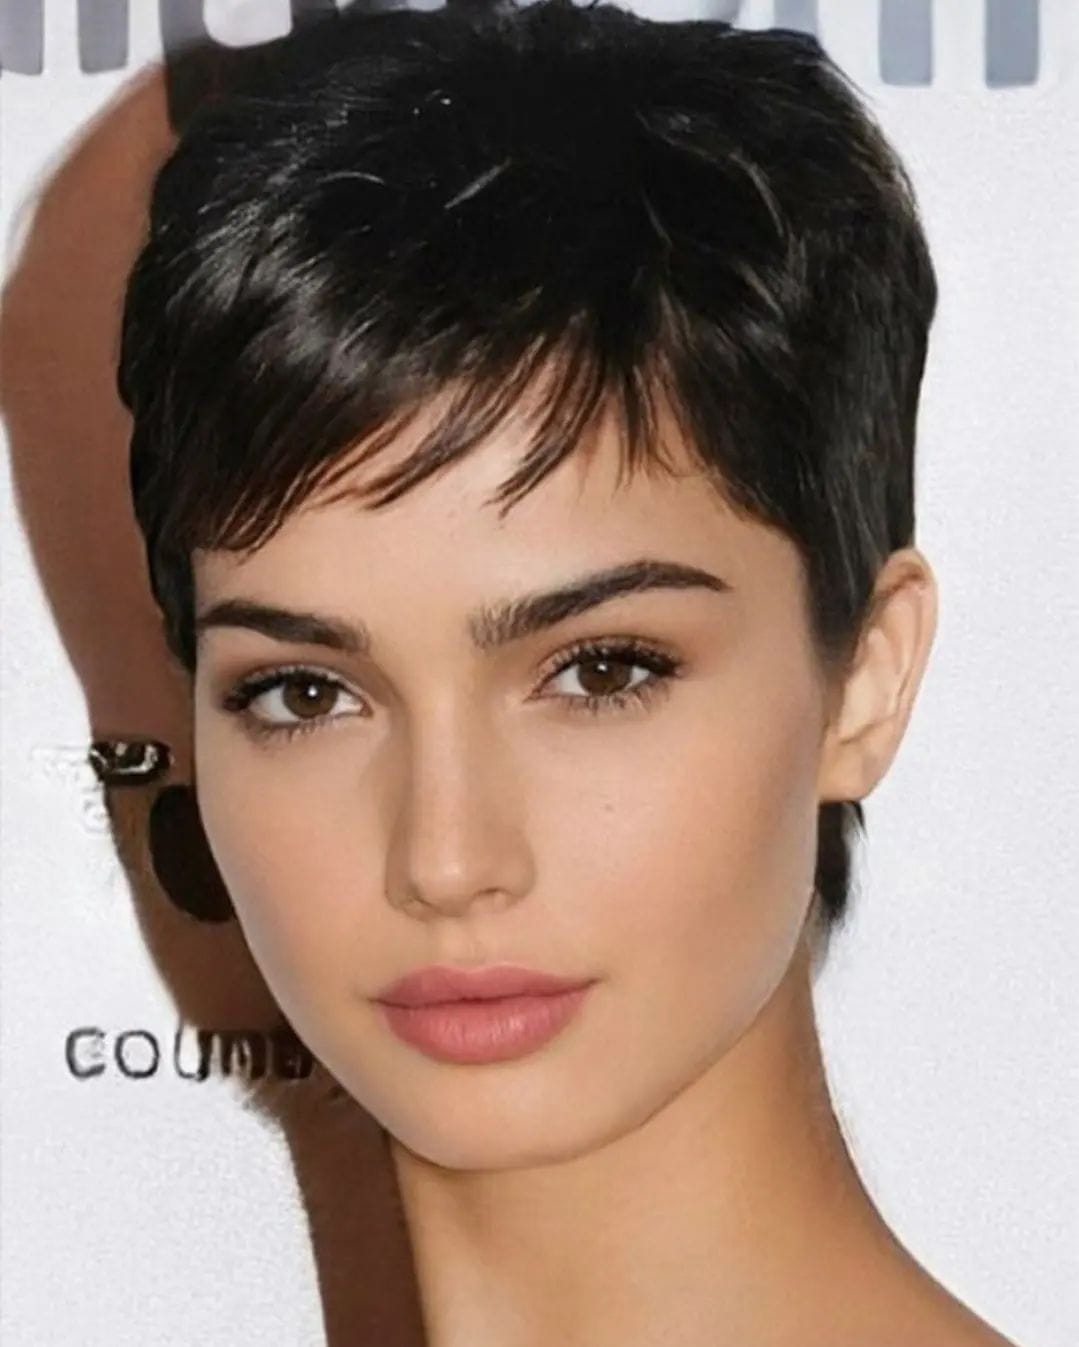 100+ Best Short Hairstyles & Haircuts For Women In 2023 images 87